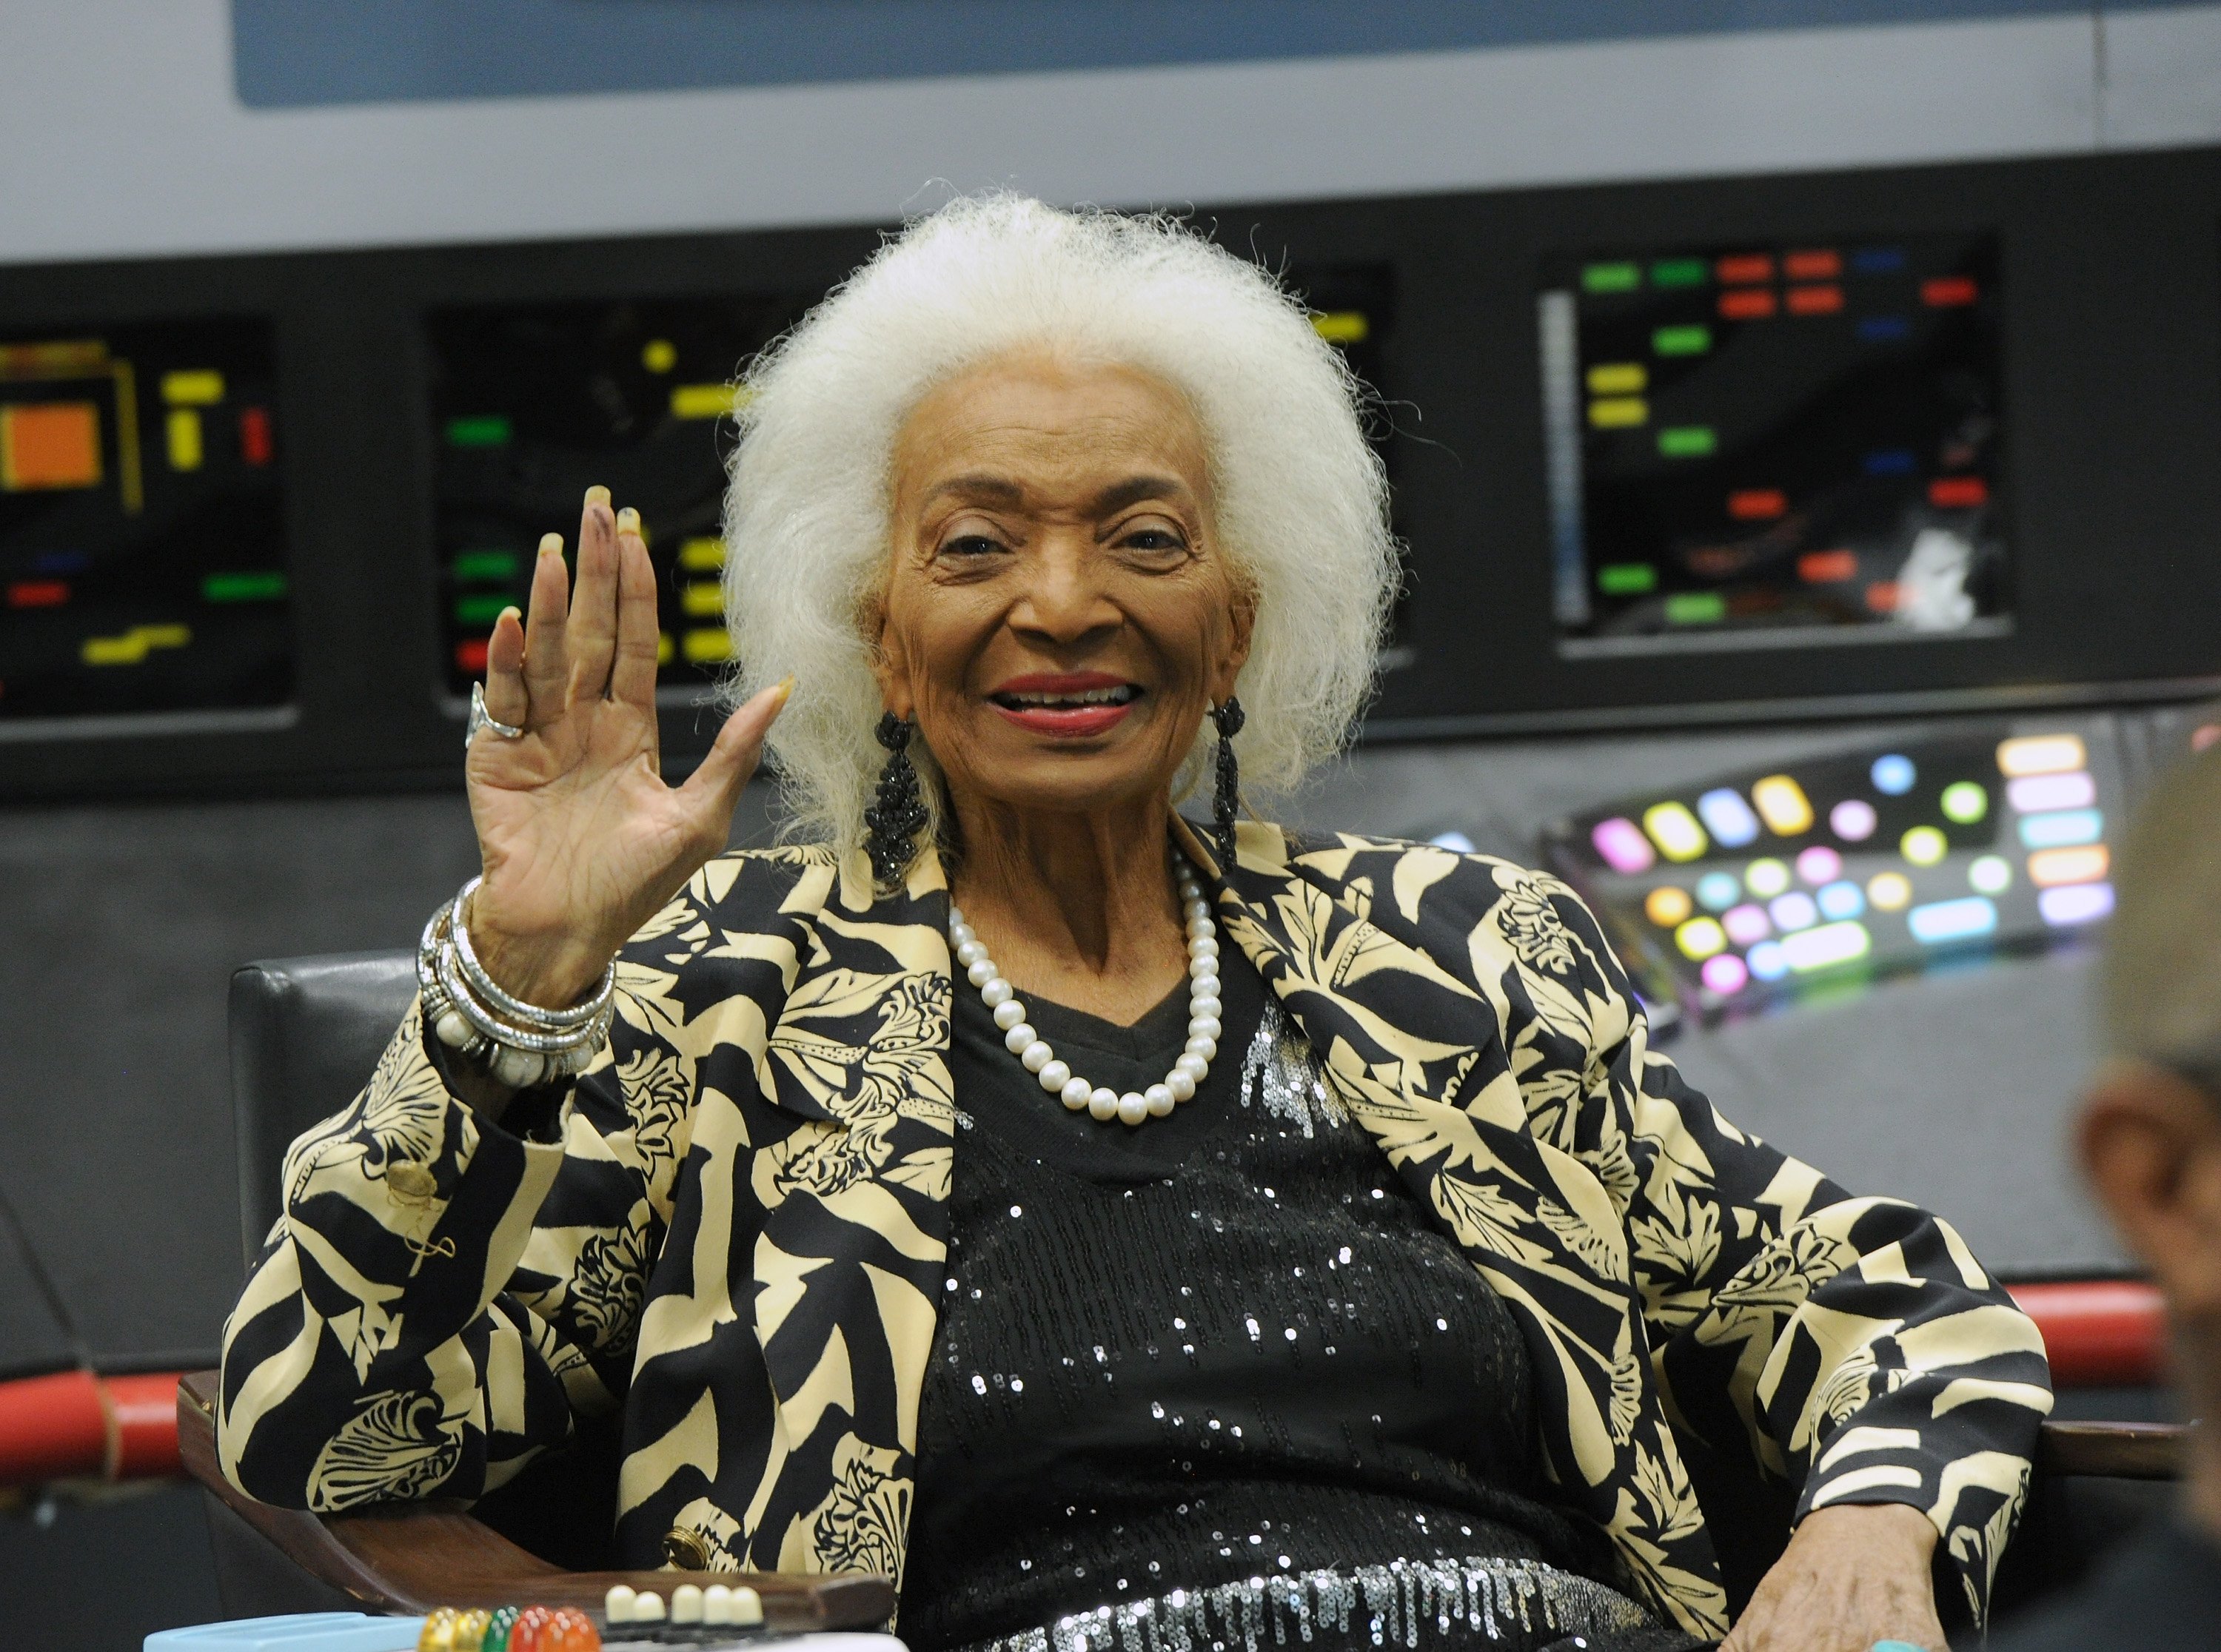 Nichelle Nichols at the Los Angeles Comic Con at Los Angeles Convention Center on December 5, 2021, in Los Angeles, California. | Source: Getty Images